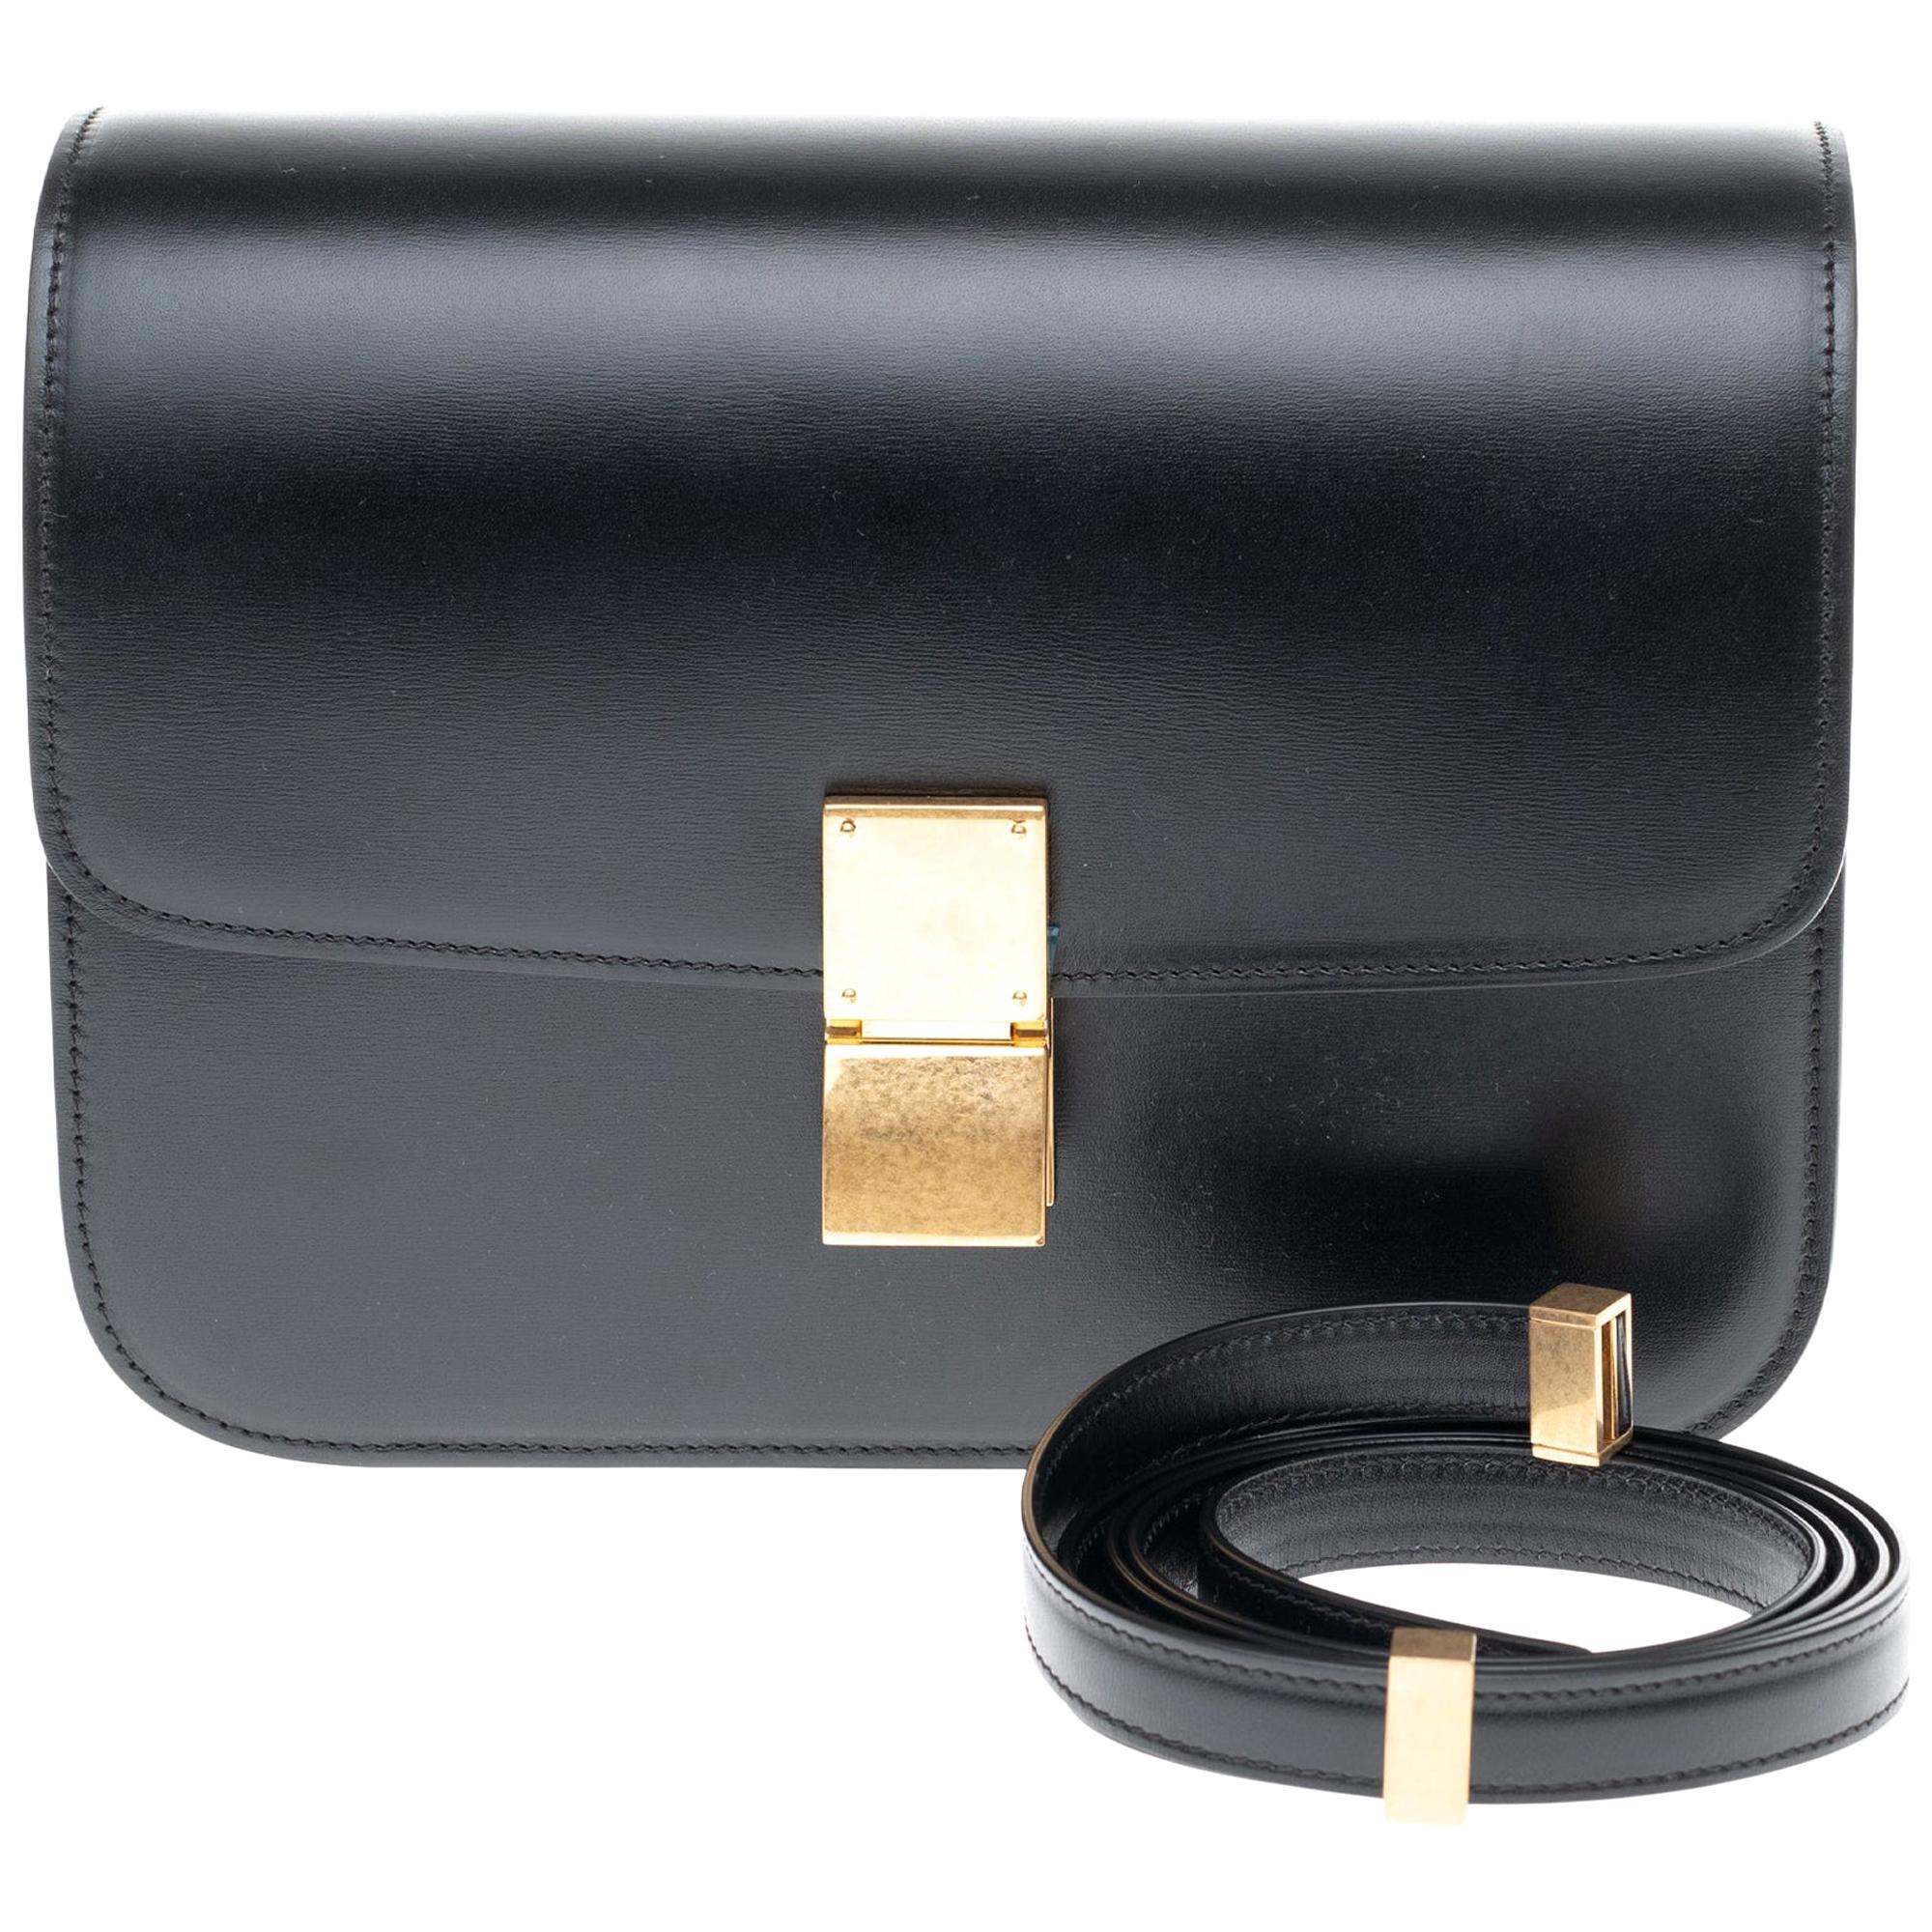 Brand New Céline Classic handbag with strap in black calfskin and gold hardware